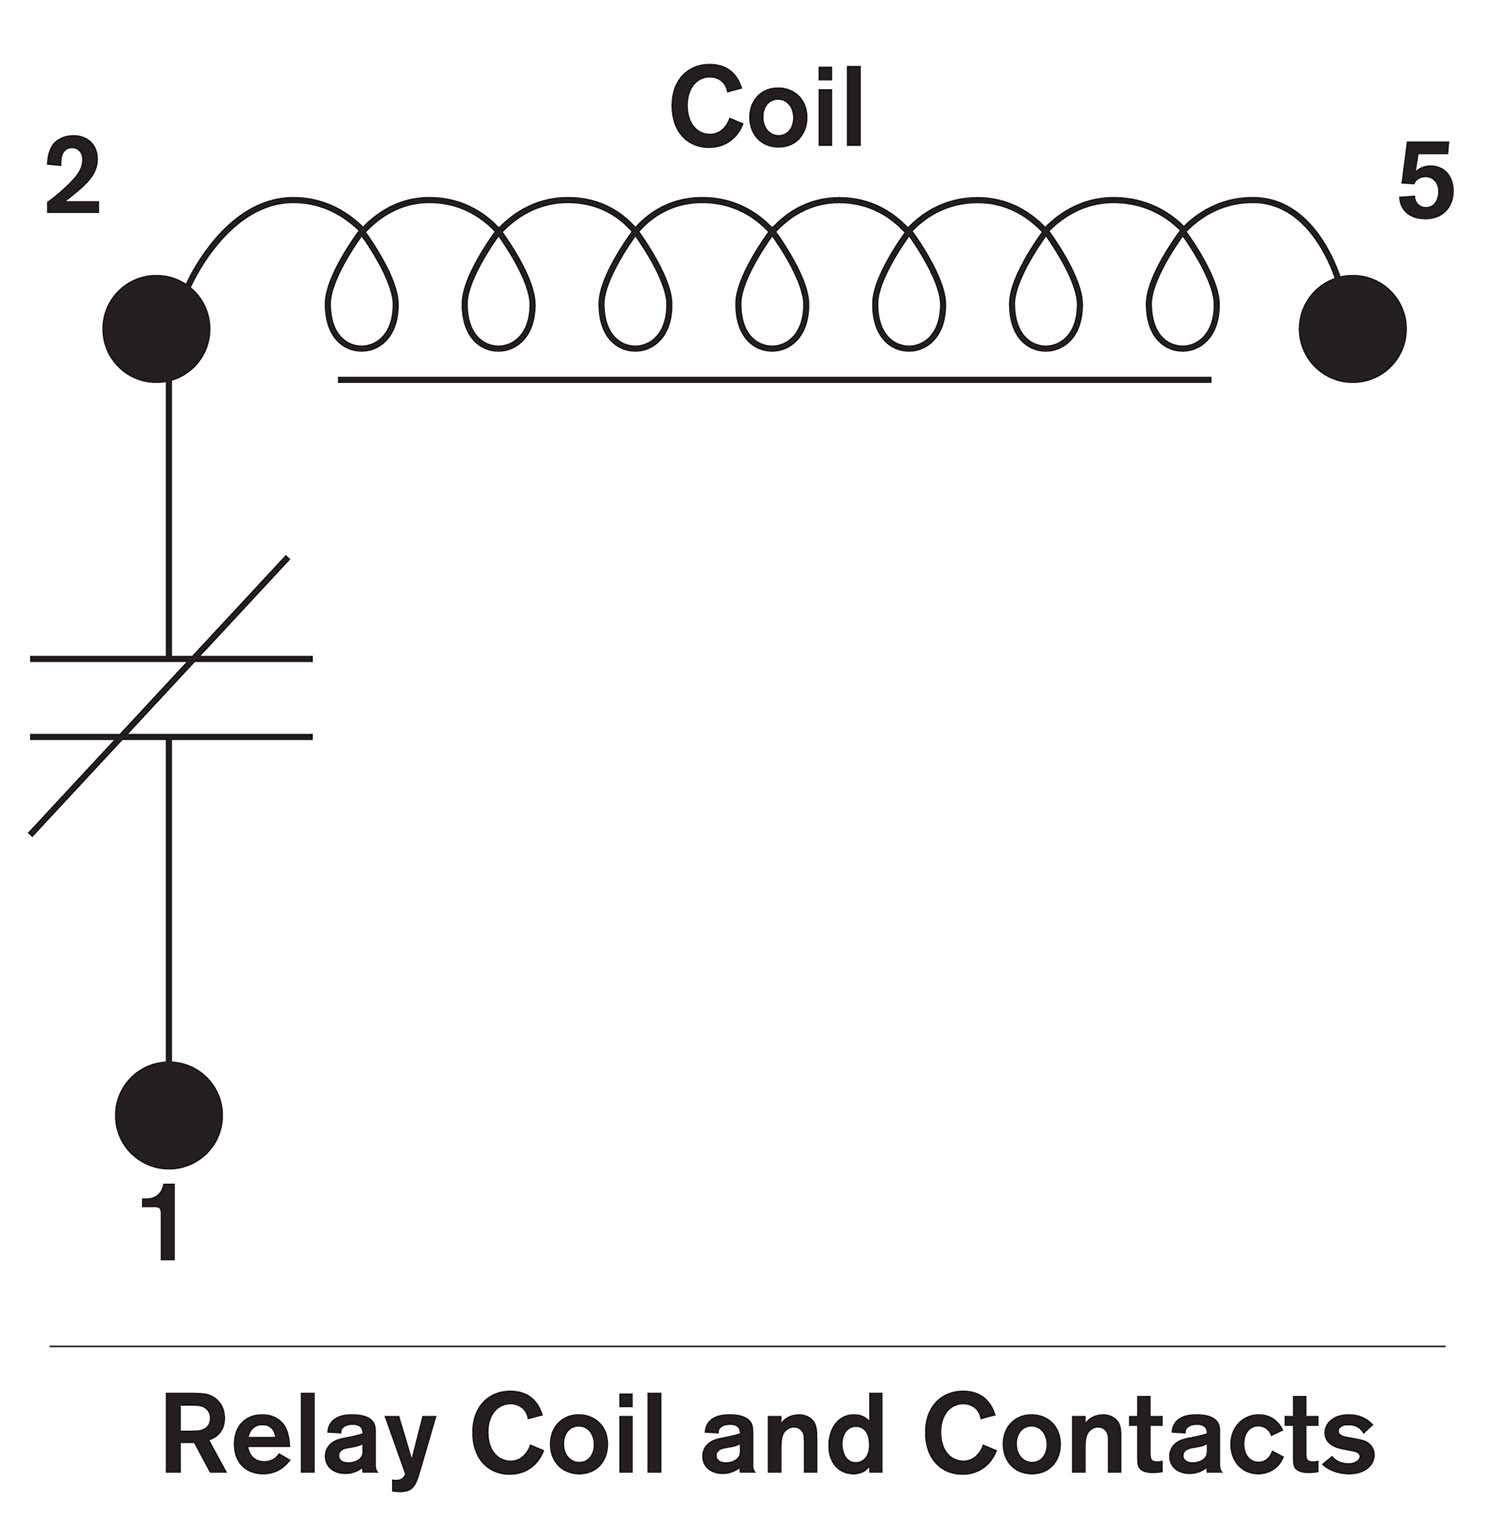 Relay Coils and Contacts.